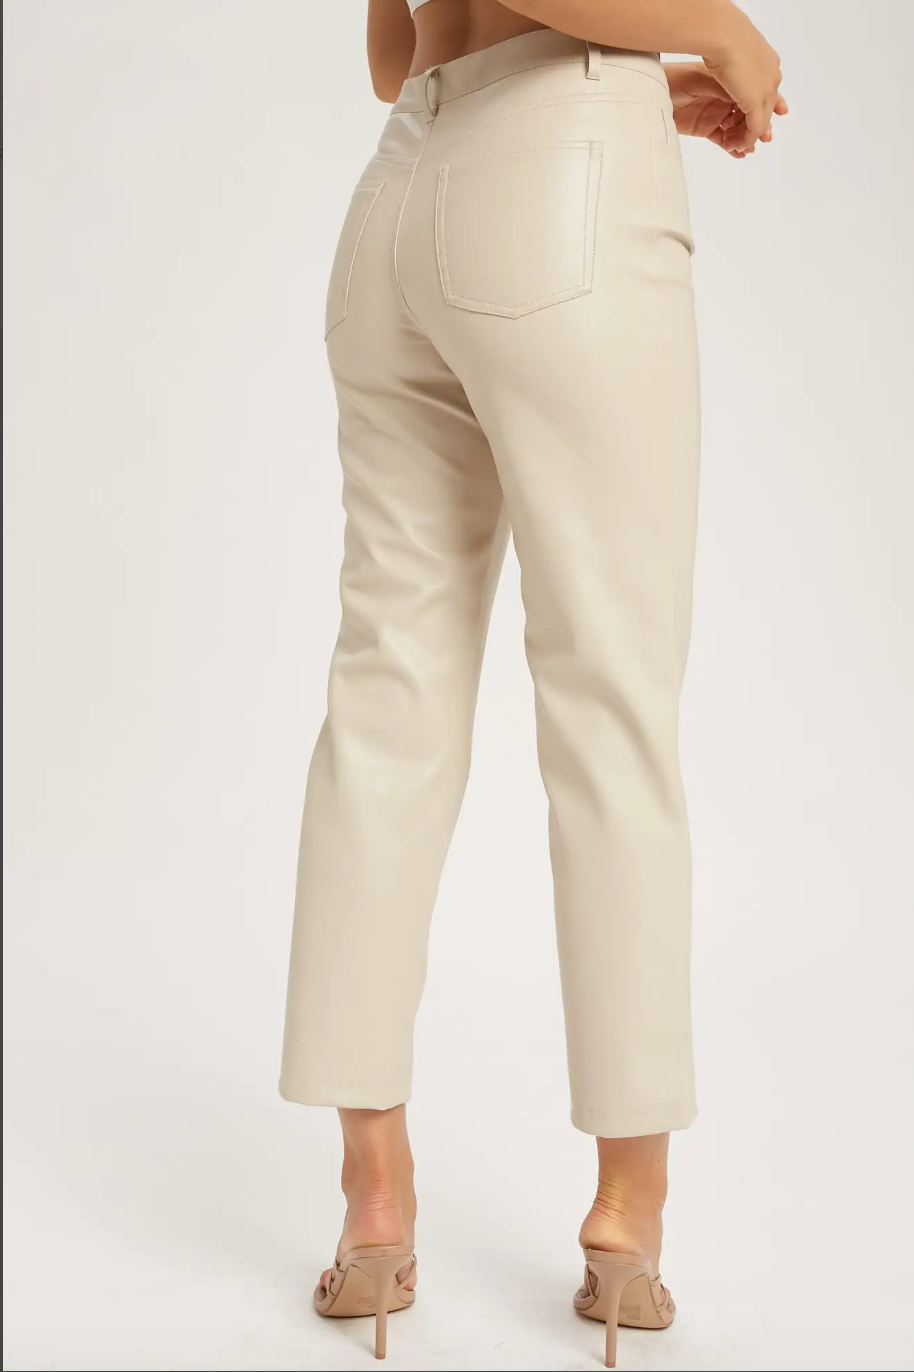 Faux Leather Straight Leg Pants by Urban Luxe Lifestyles